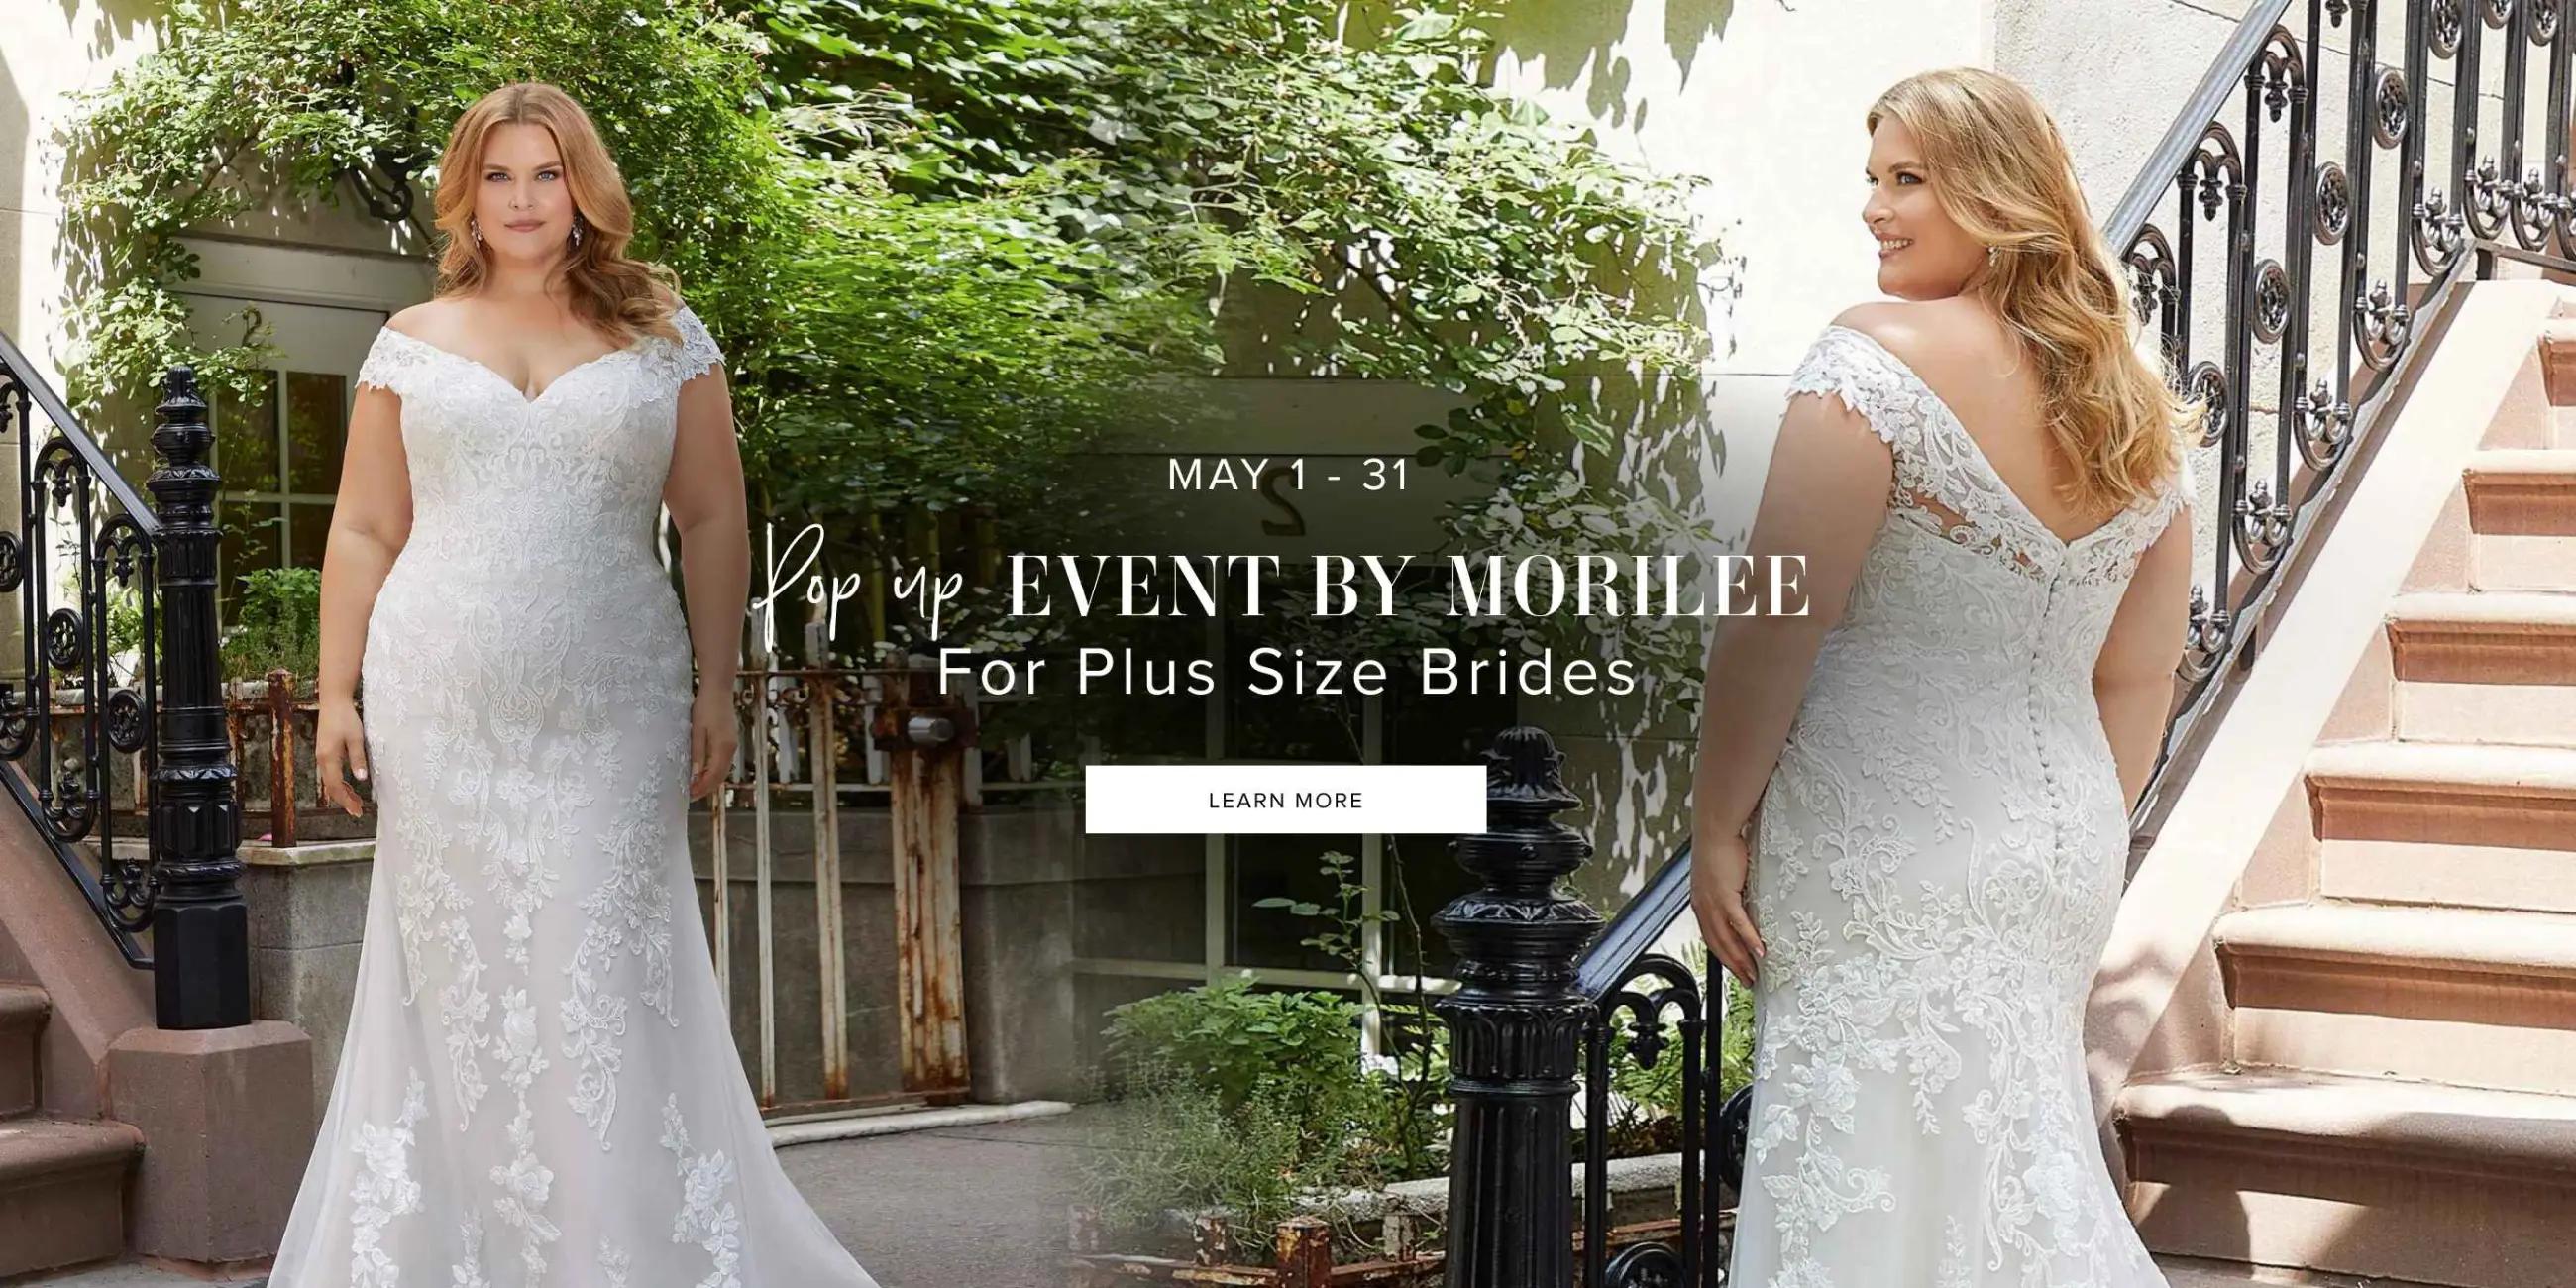 pop up event by morilee for plus size brides